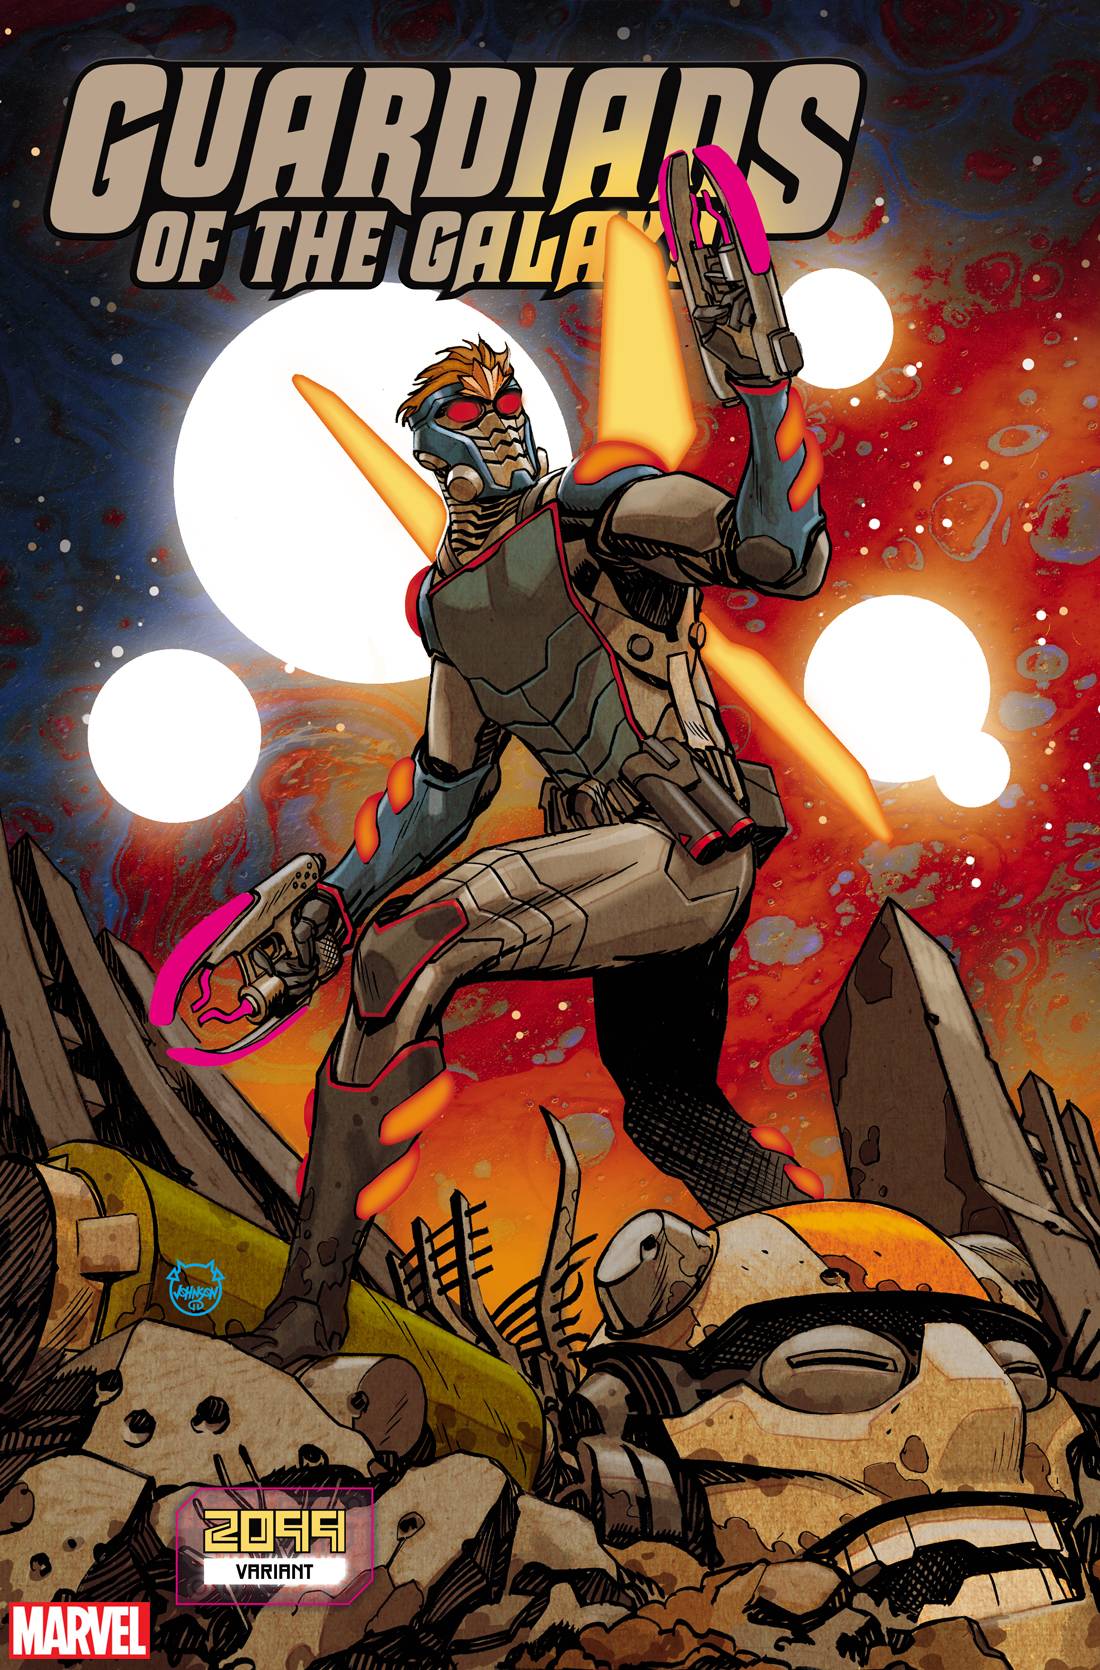 GUARDIANS OF THE GALAXY #11 JOHNSON 2099 VARIANT 2019